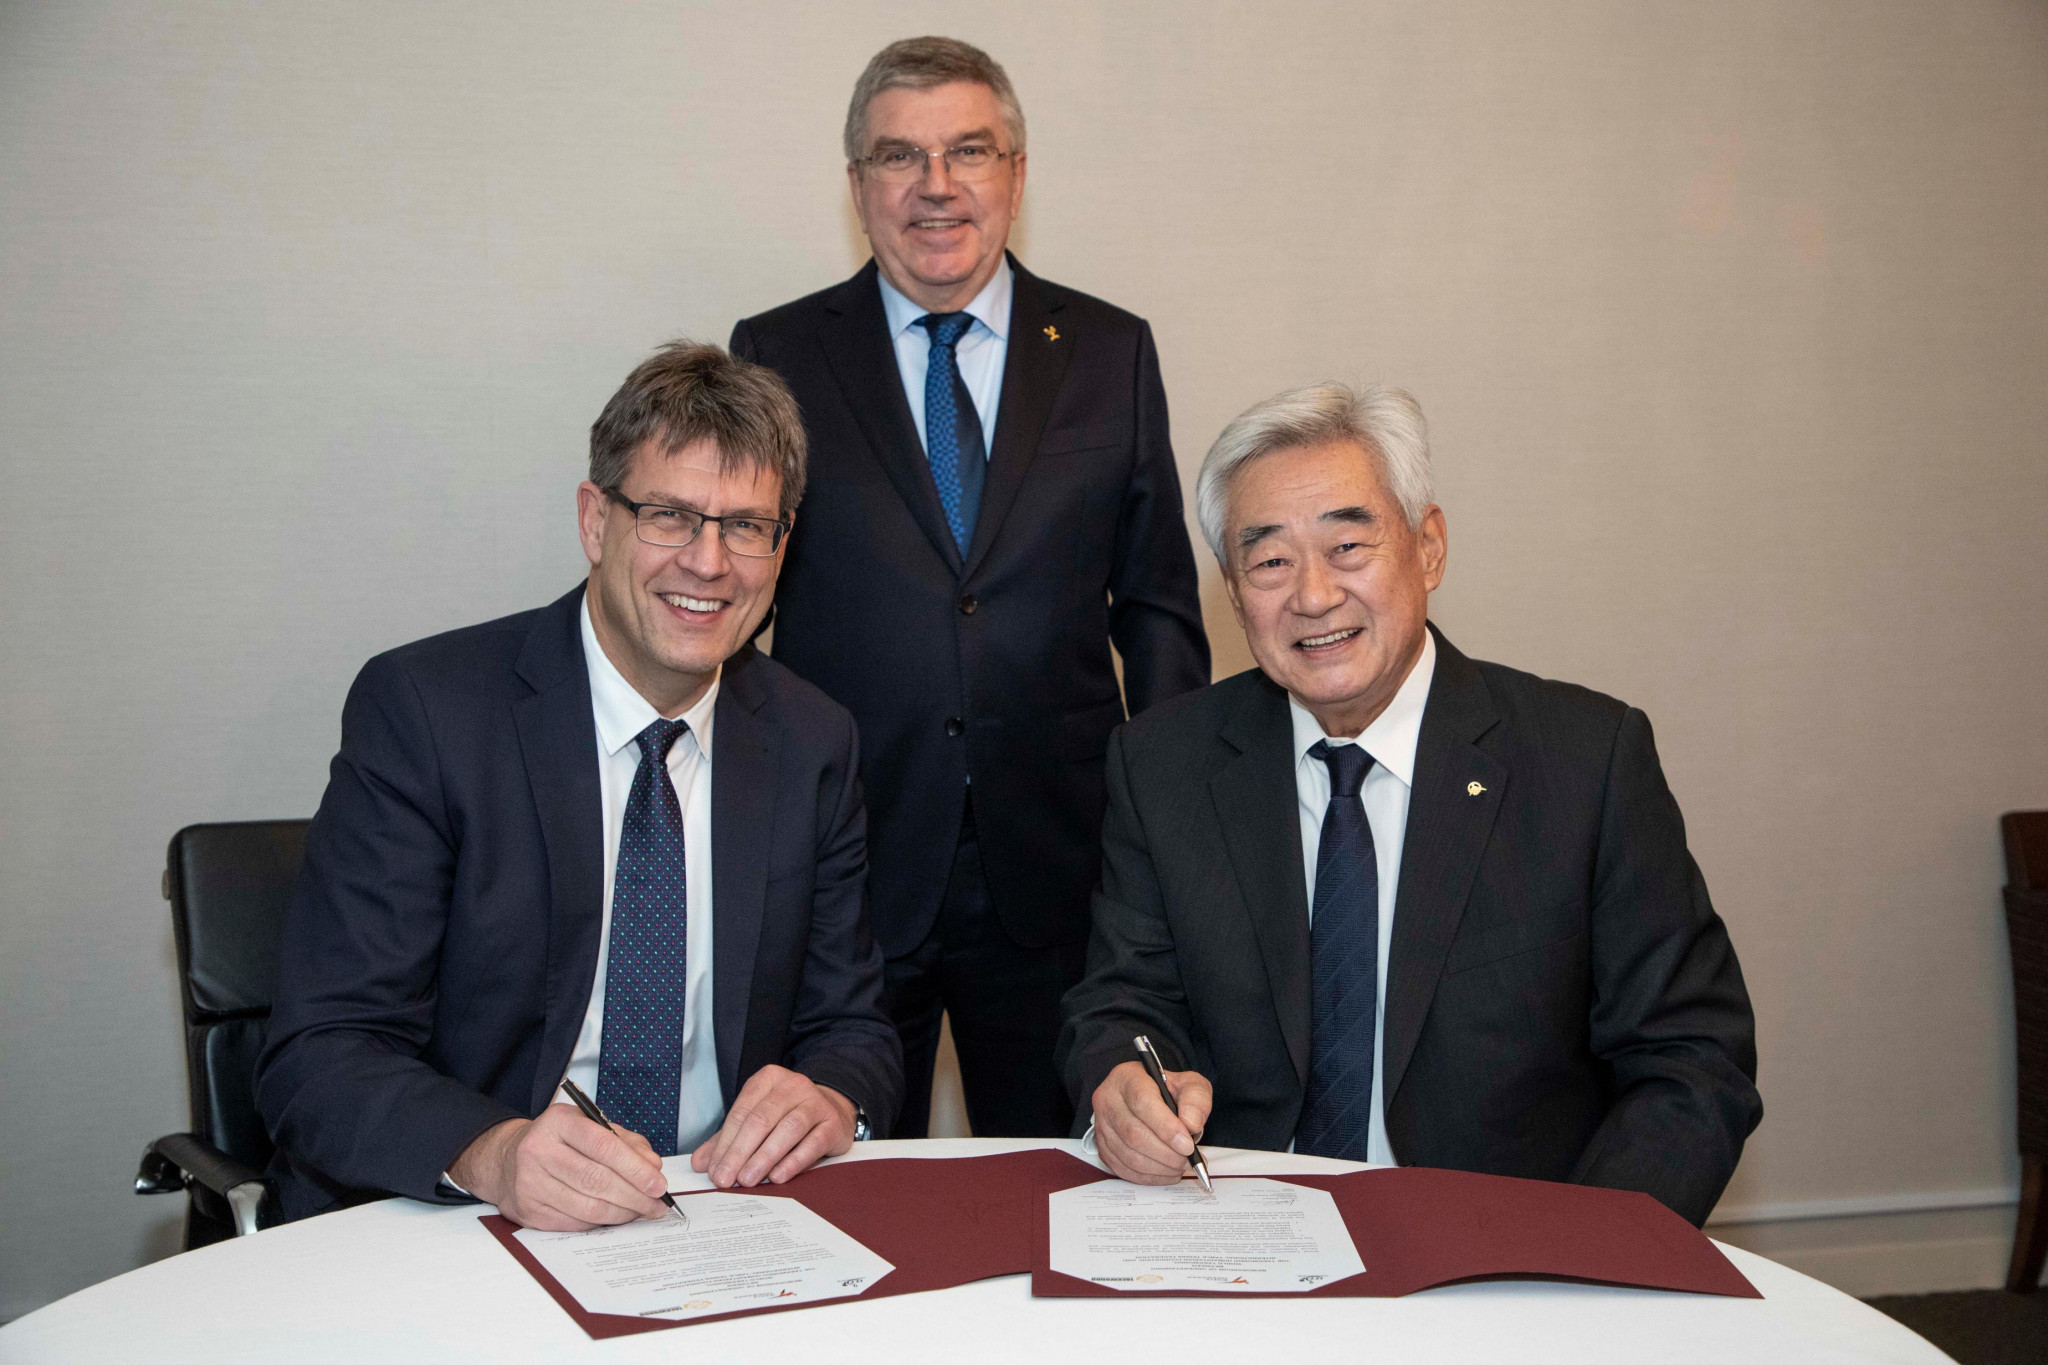 Taekwondo Humanitarian Foundation and ITTF sign agreement to promote peace through sport